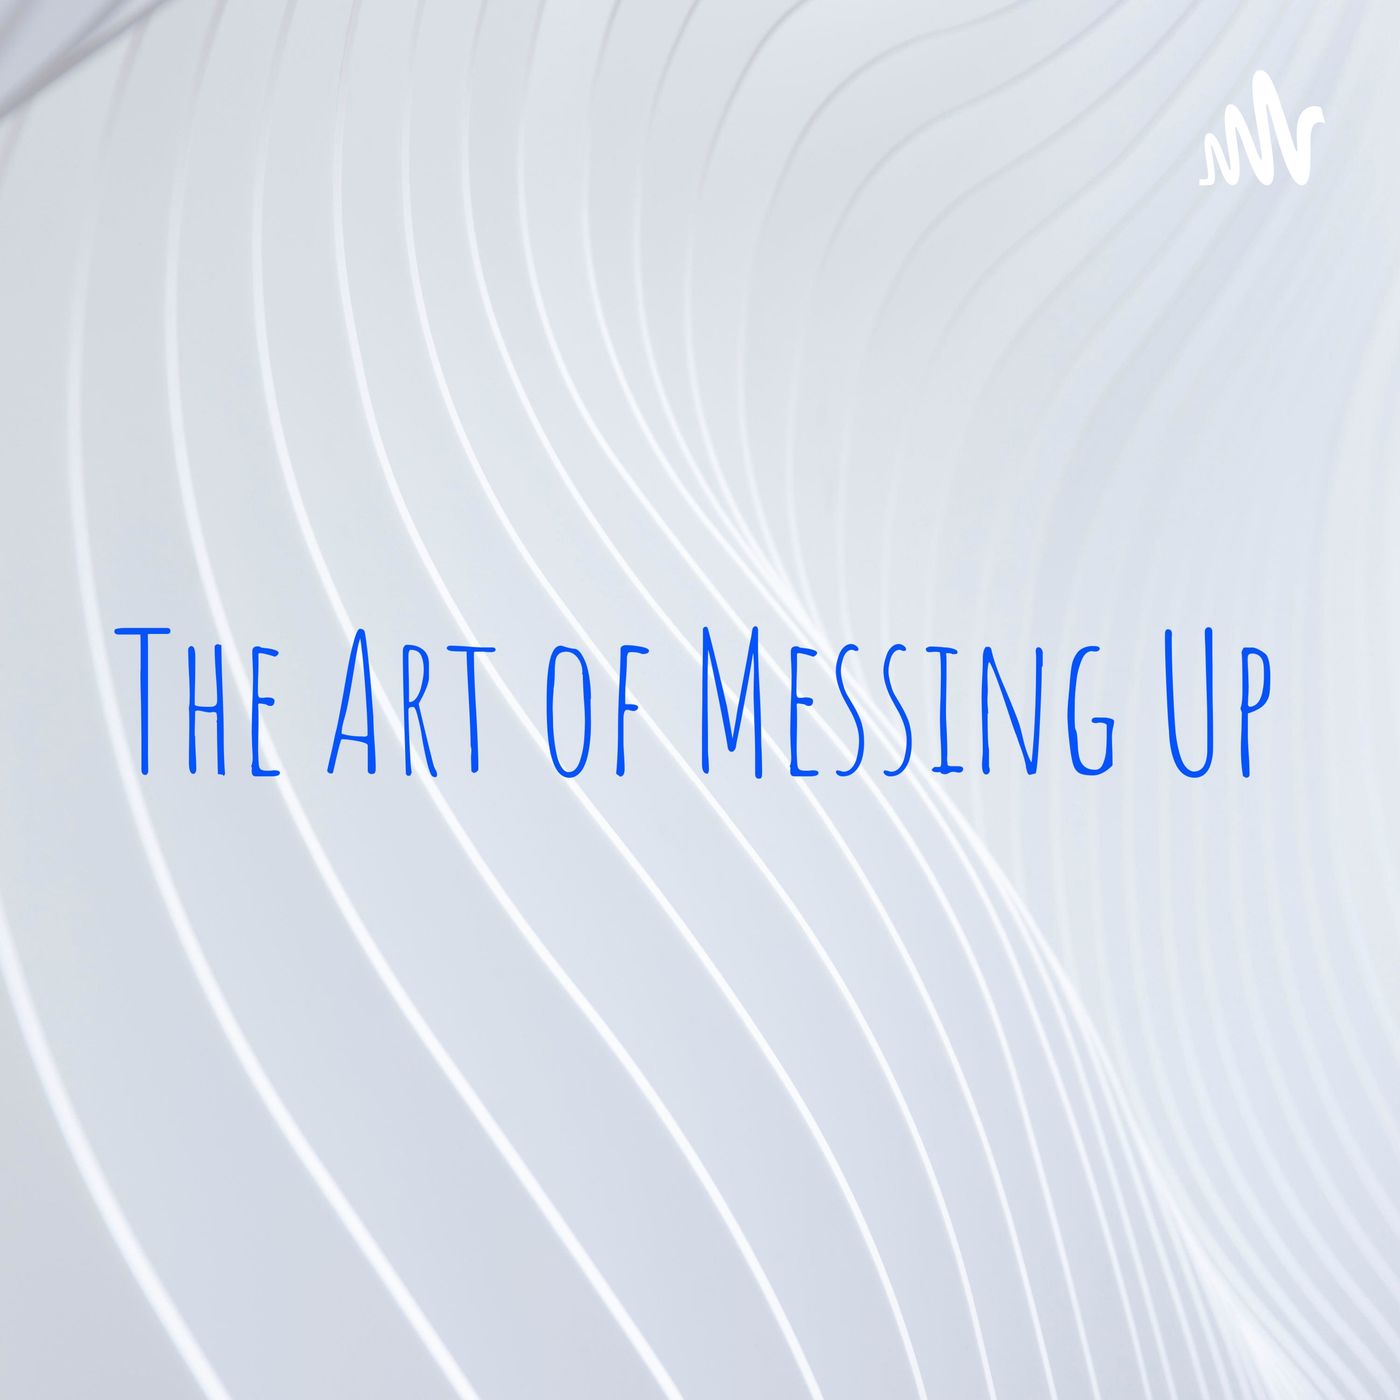 The Art of Messing Up